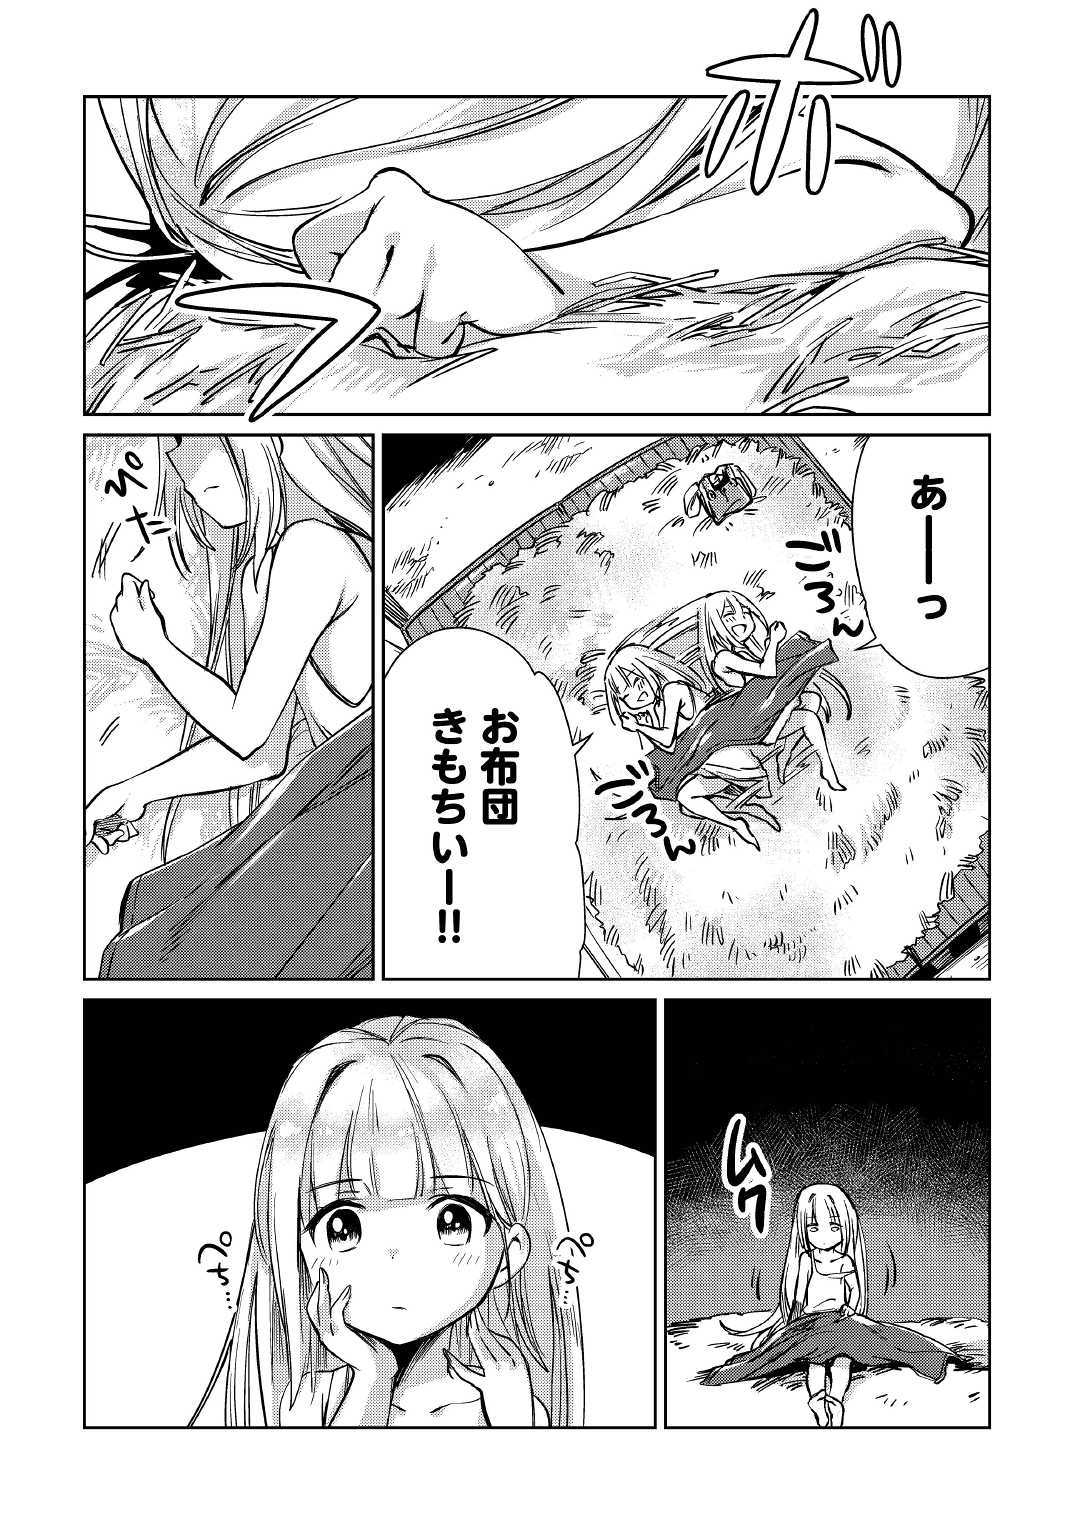 The Former Structural Researcher’s Story of Otherworldly Adventure 第14話 - Page 30